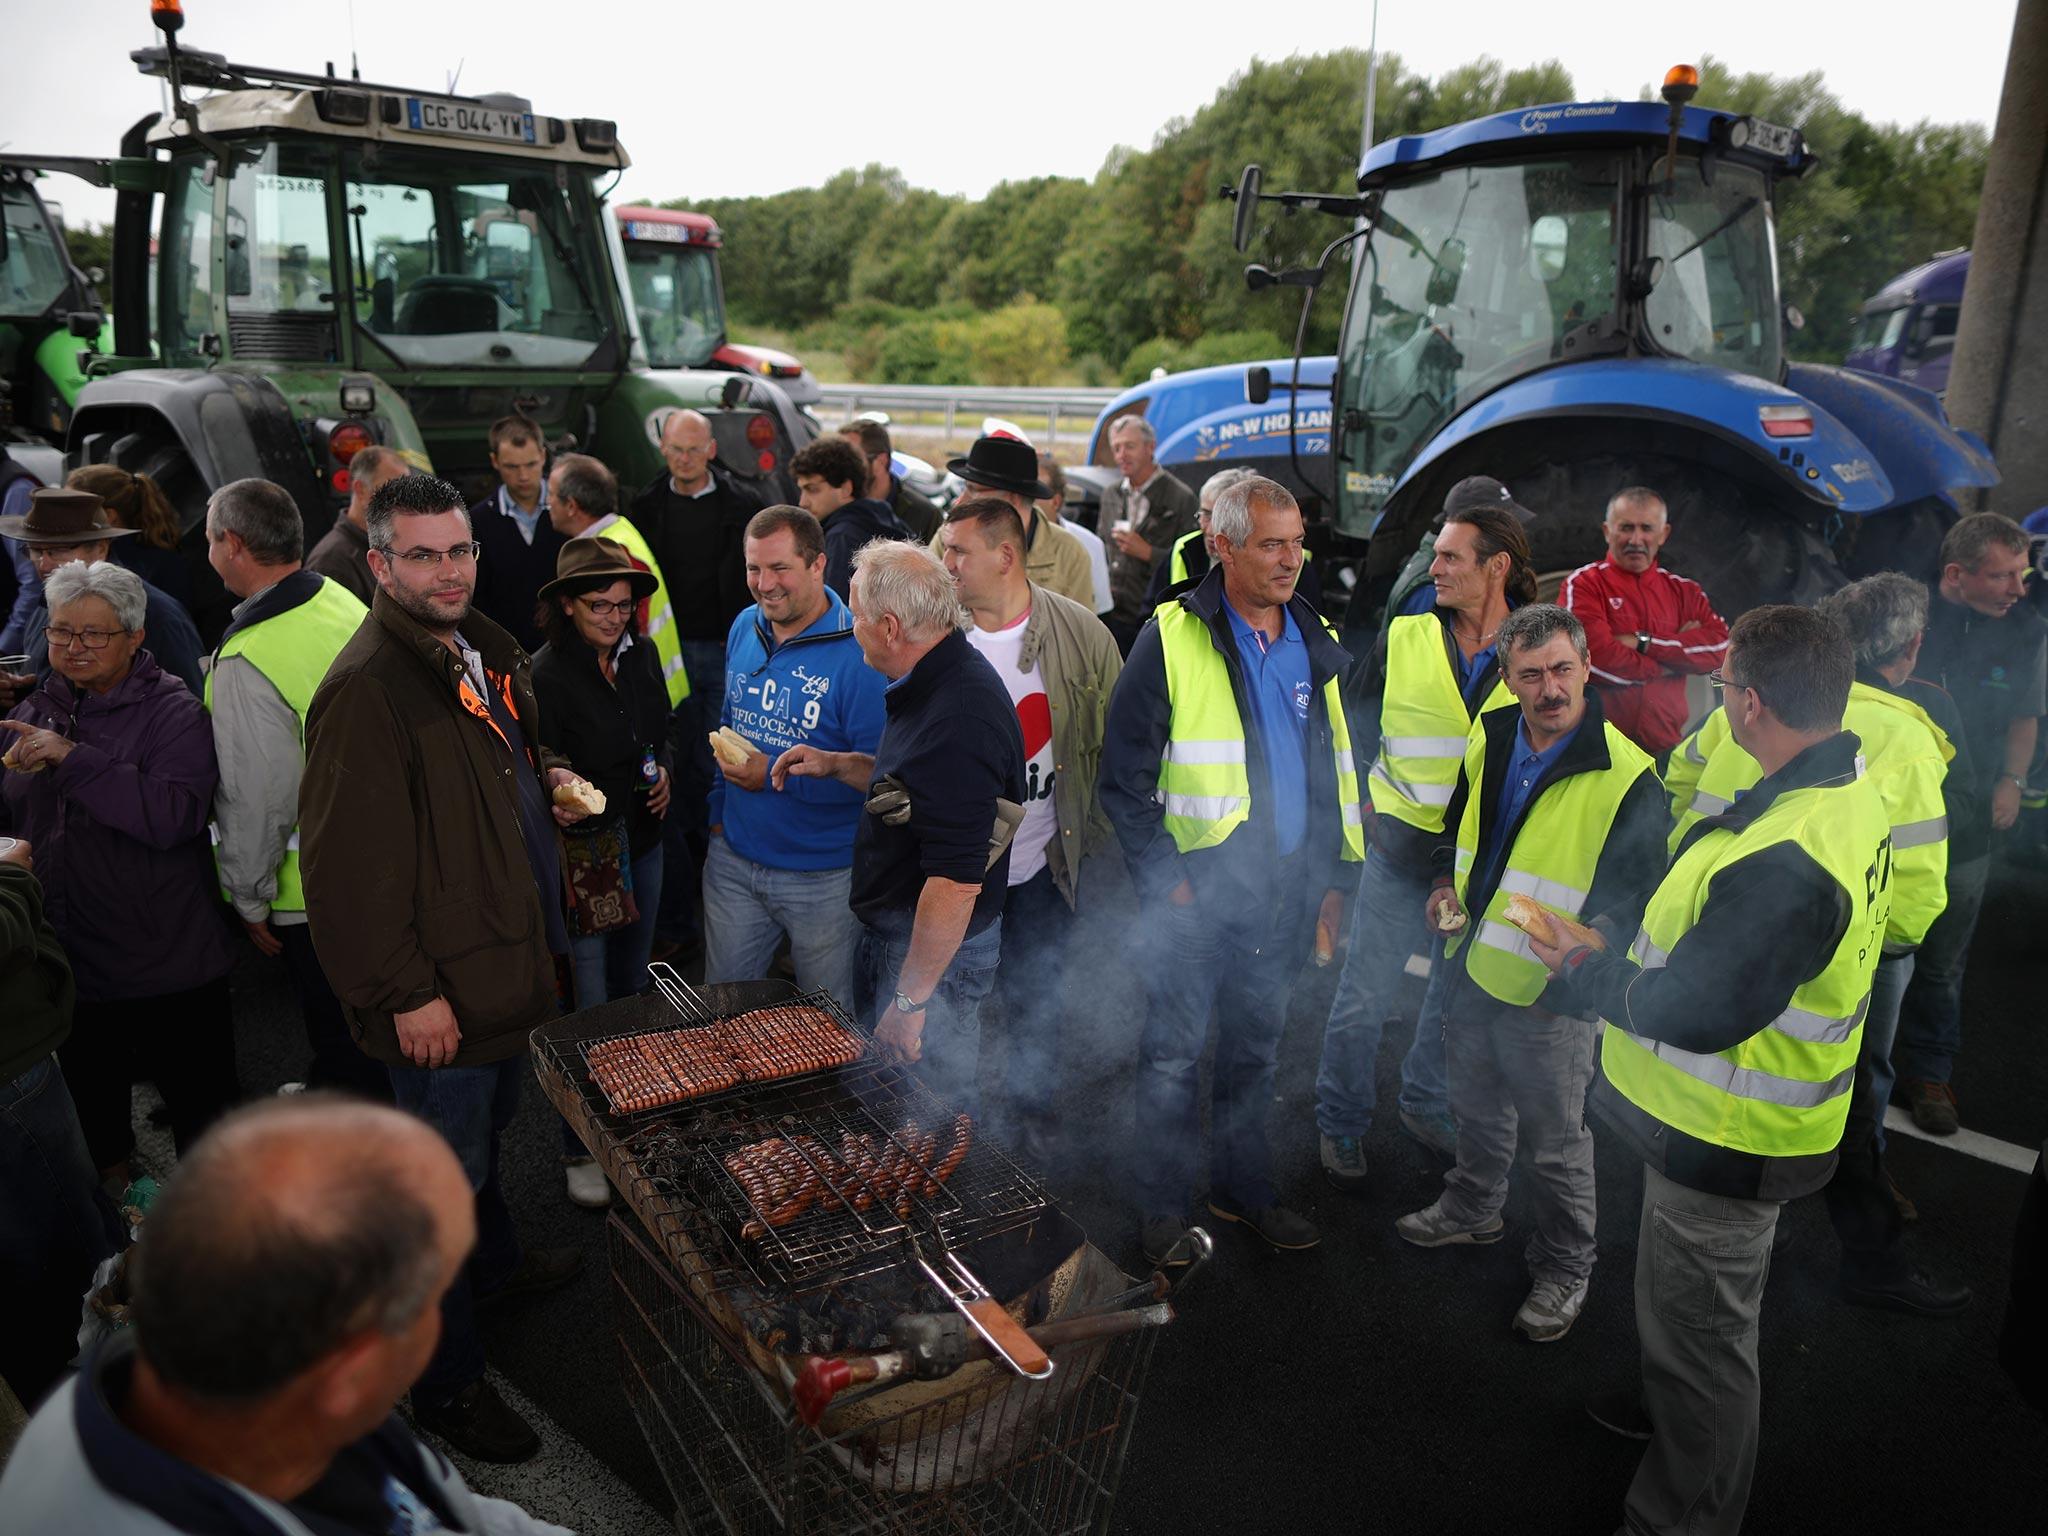 French farmers cook on a barbecue during their blockade